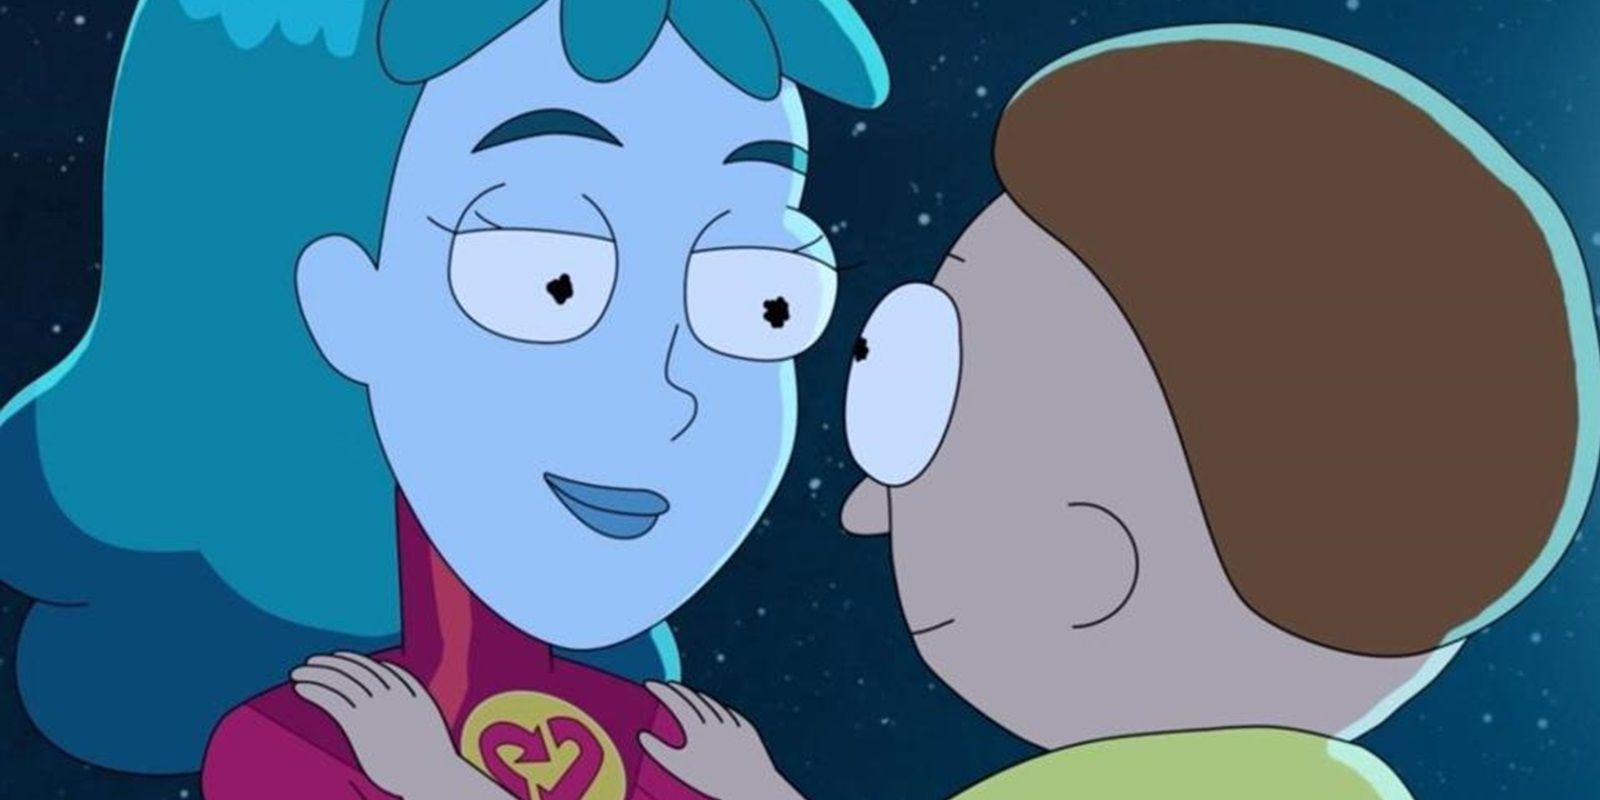 Planetina gazing at Morty in Rick and Morty